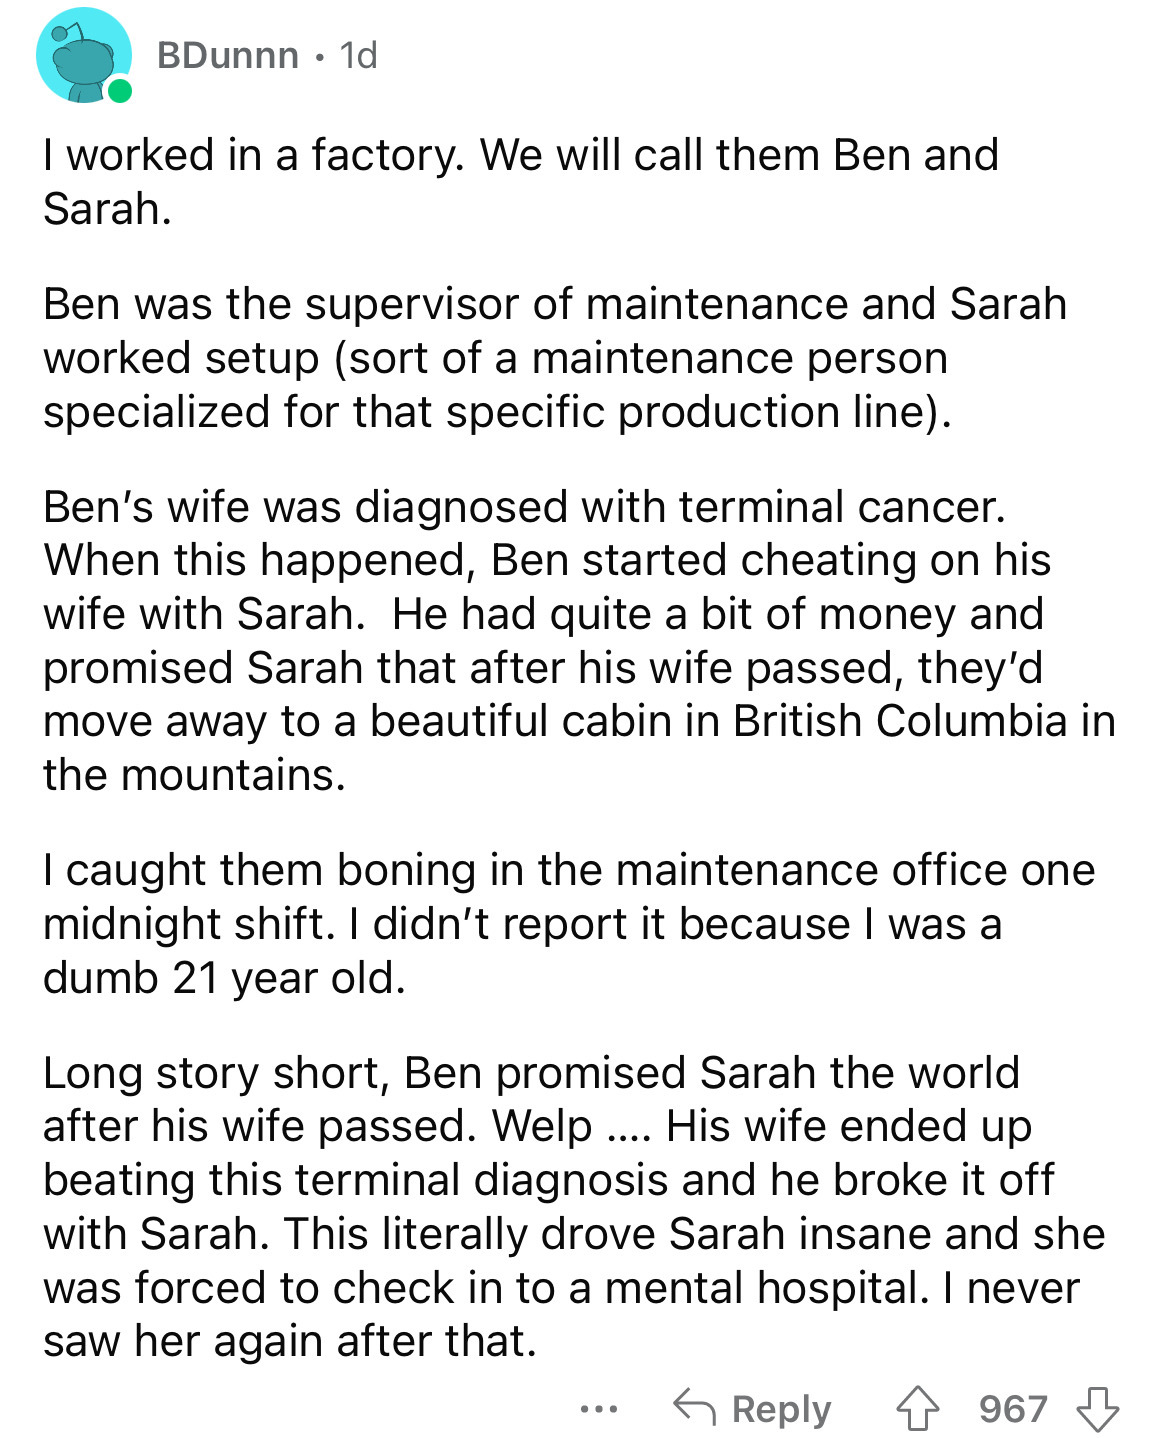 document - BDunnn . 1d I worked in a factory. We will call them Ben and Sarah. Ben was the supervisor of maintenance and Sarah worked setup sort of a maintenance person specialized for that specific production line. Ben's wife was diagnosed with terminal 